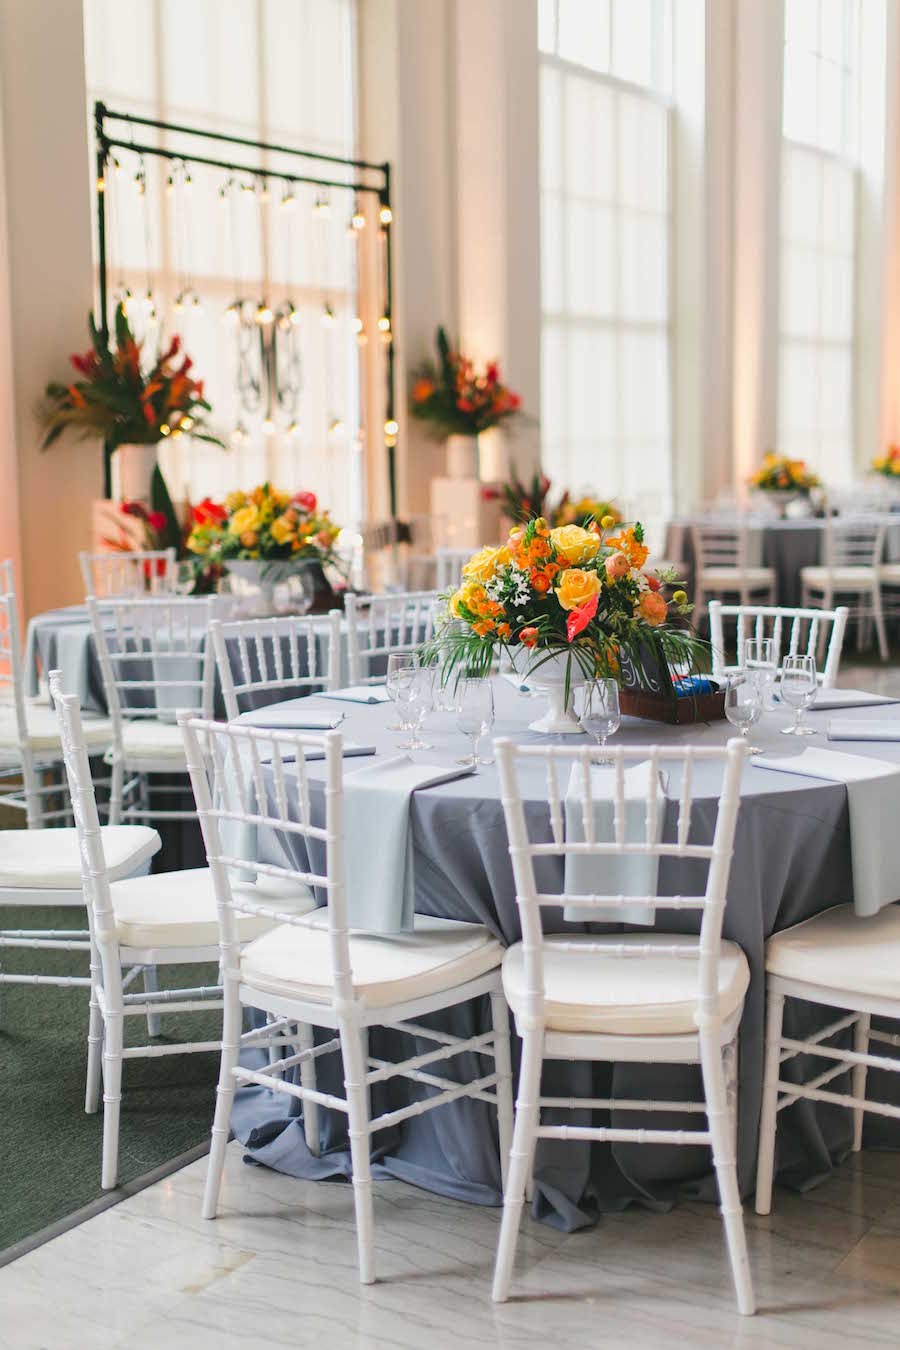 Tropical Wedding Reception Décor with Gray Table Linens and Bright Yellow and Orange Floral Wedding Centerpieces with White Chiavari Chairs | Tampa Wedding Planner Blush by Brandee Gaar | Photography by Roohi Photography | Downtown Tampa Wedding Venue The Vault